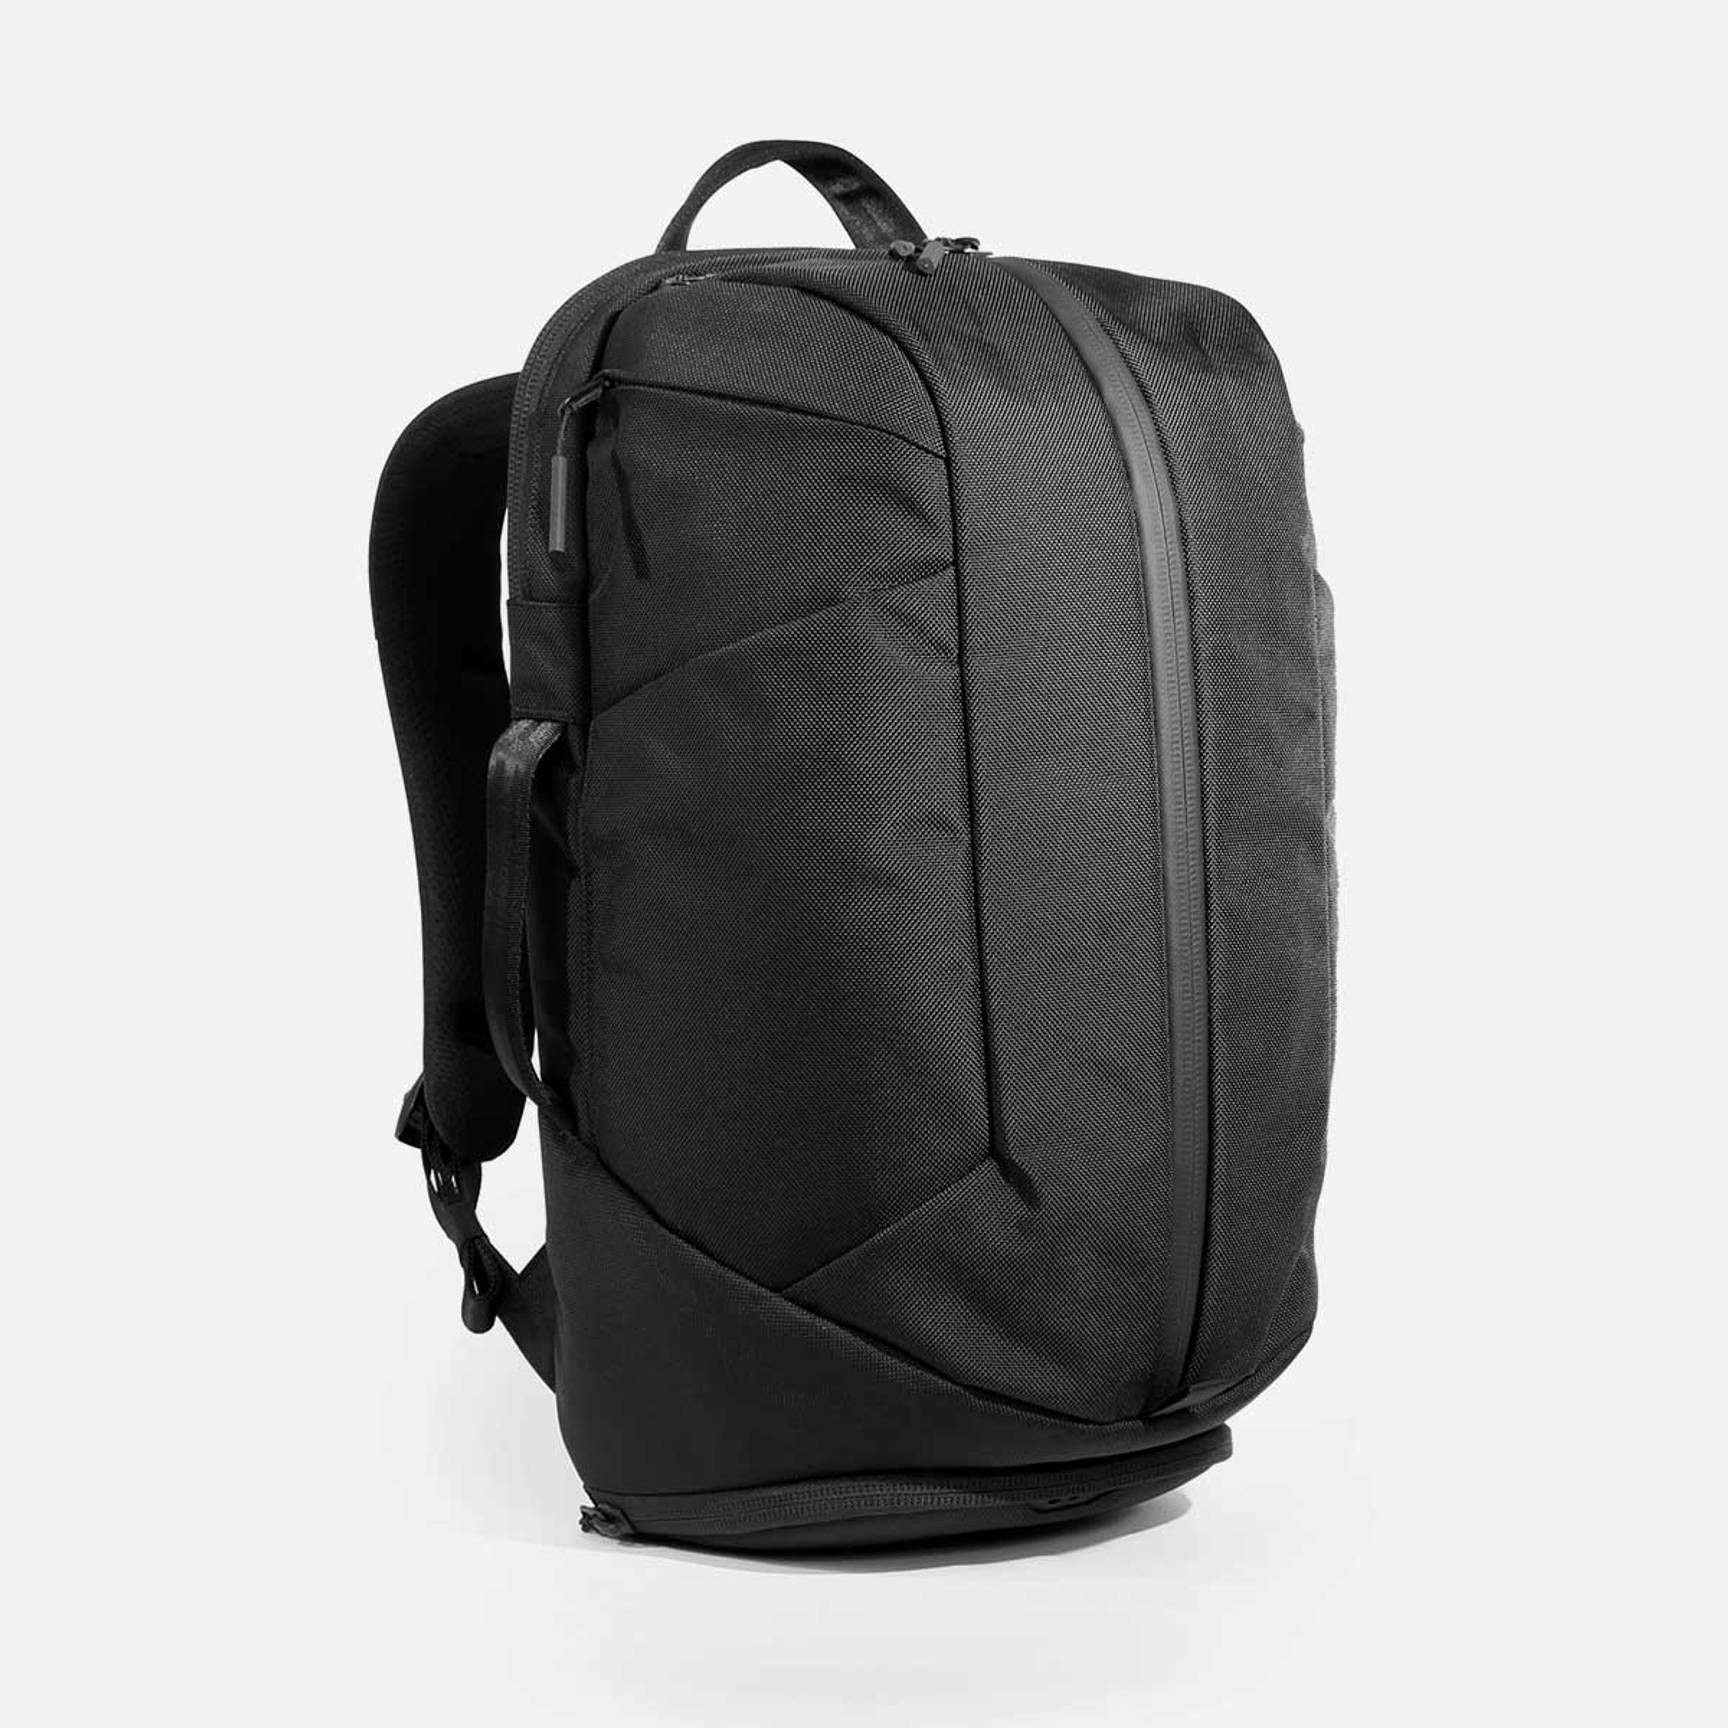 The 13 Best Laptop Bags for Men in 2022 - The Manual